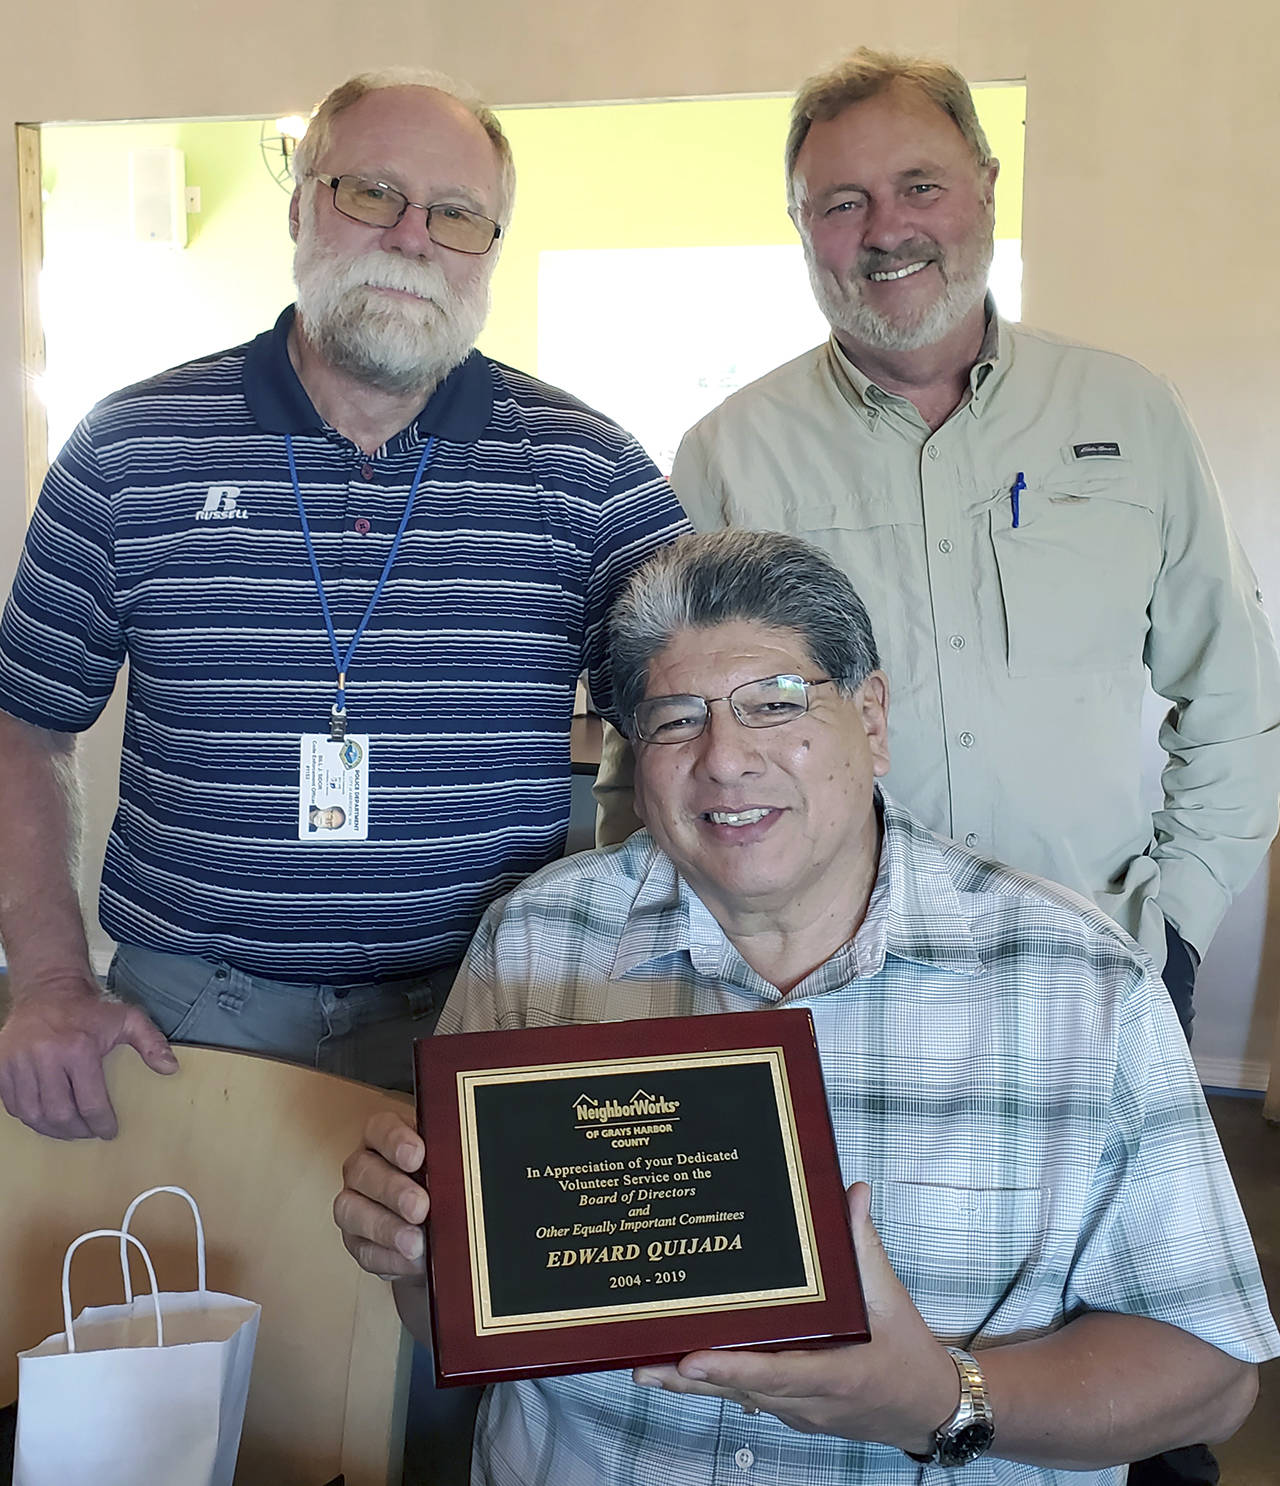 Courtesy photo                                NeighborWorks of Grays Harbor recently honored Edward Quijada, center, for his longtime work on the board. Quijada, who recently retired as Hoquiam branch manager of Bank of the Pacific, is flanked by board president Bill Sidor, left, and executive director Dave Murnen. During his tenure since 2004, Quijada is a past board president and has served on a variety of committees. NeighborWorks is a nonprofit organization that works to provide safe, affordable housing for the people of Grays Harbor County.